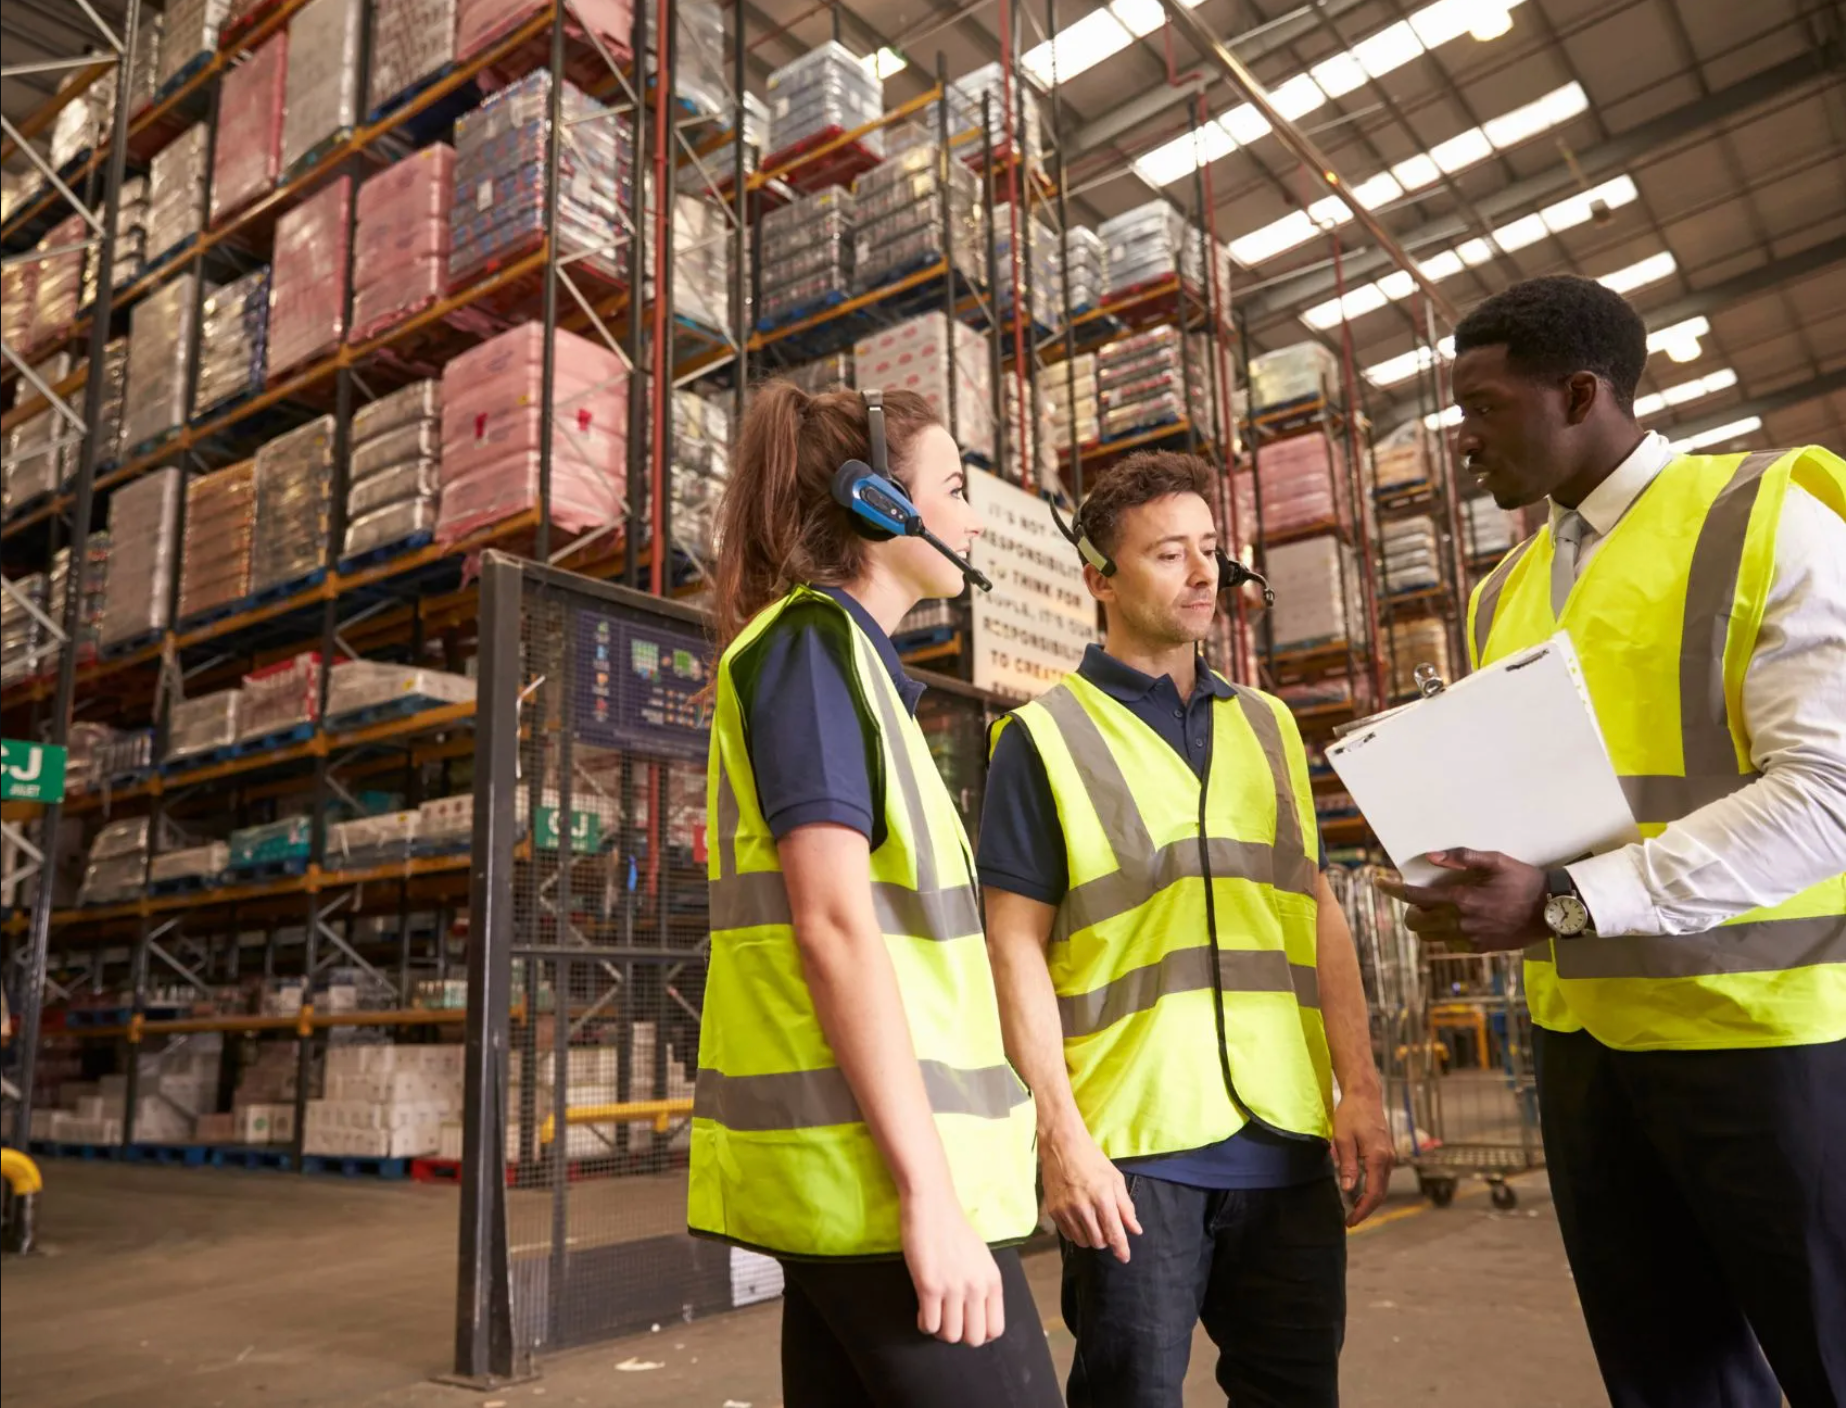 Group of Employees Having a Discussion in a Warehouse